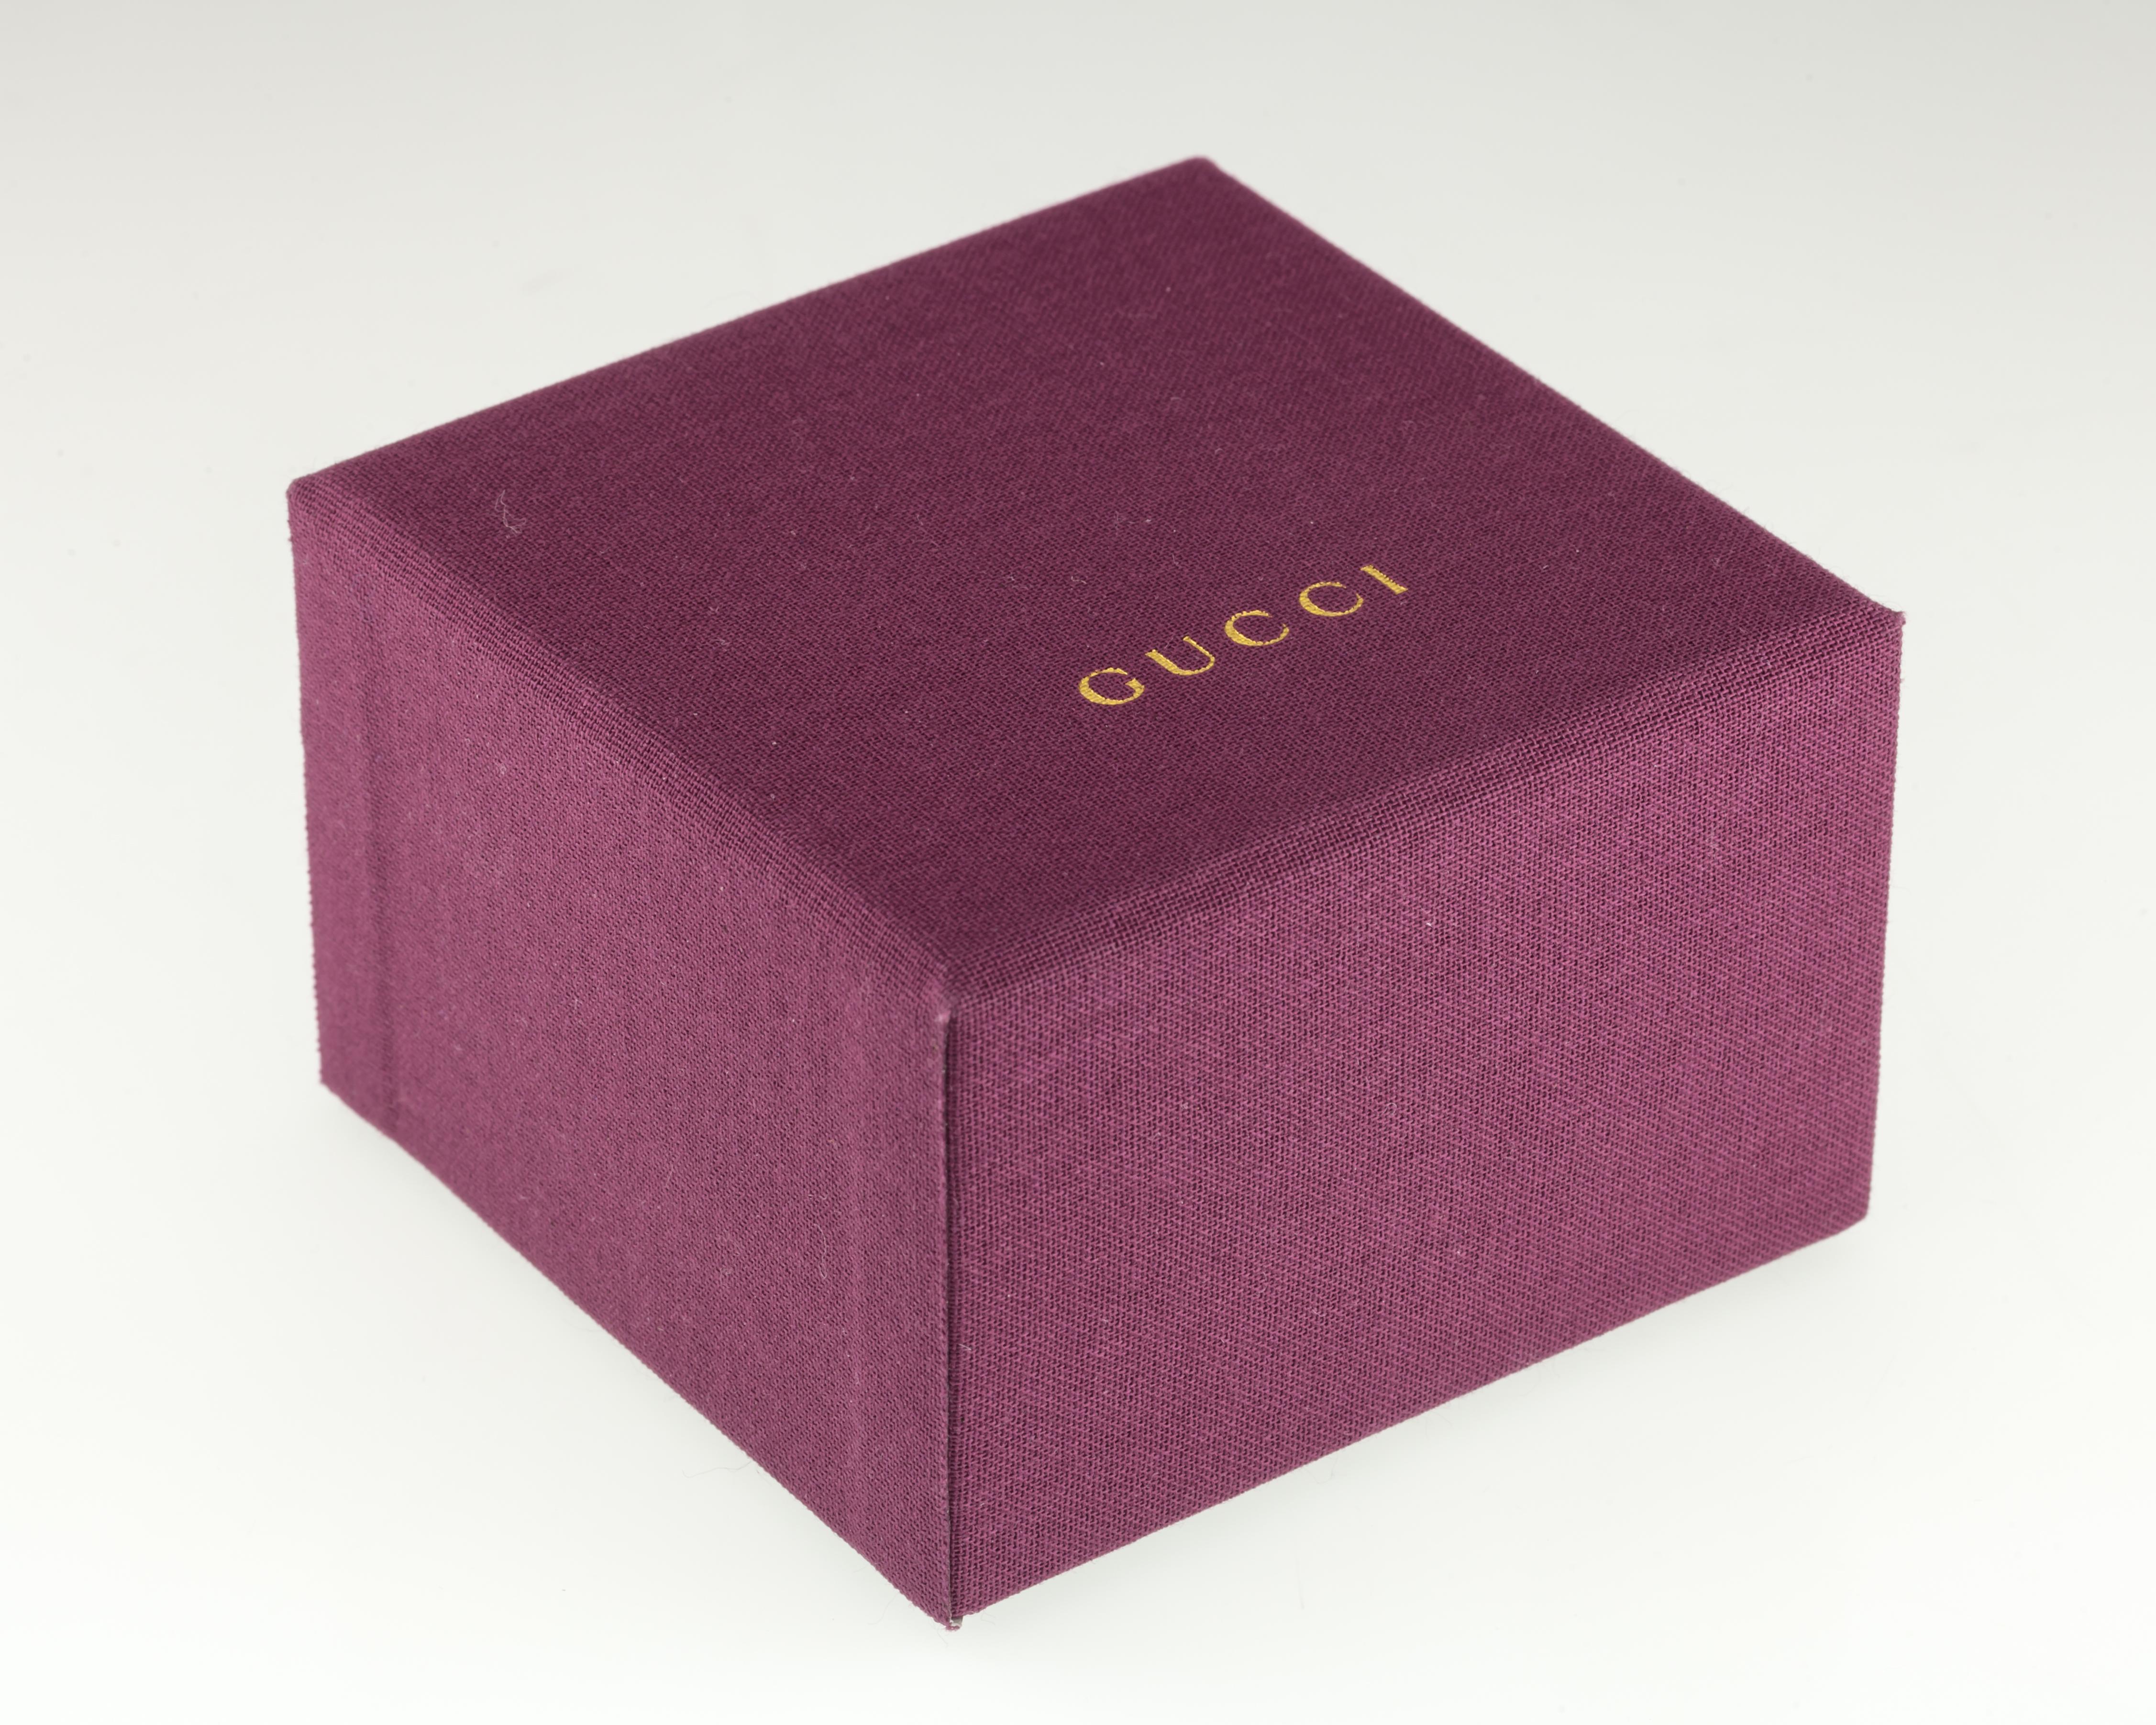 Gucci Sterling Silver Interlocking G Band Ring with Box & Pouch For Sale 1